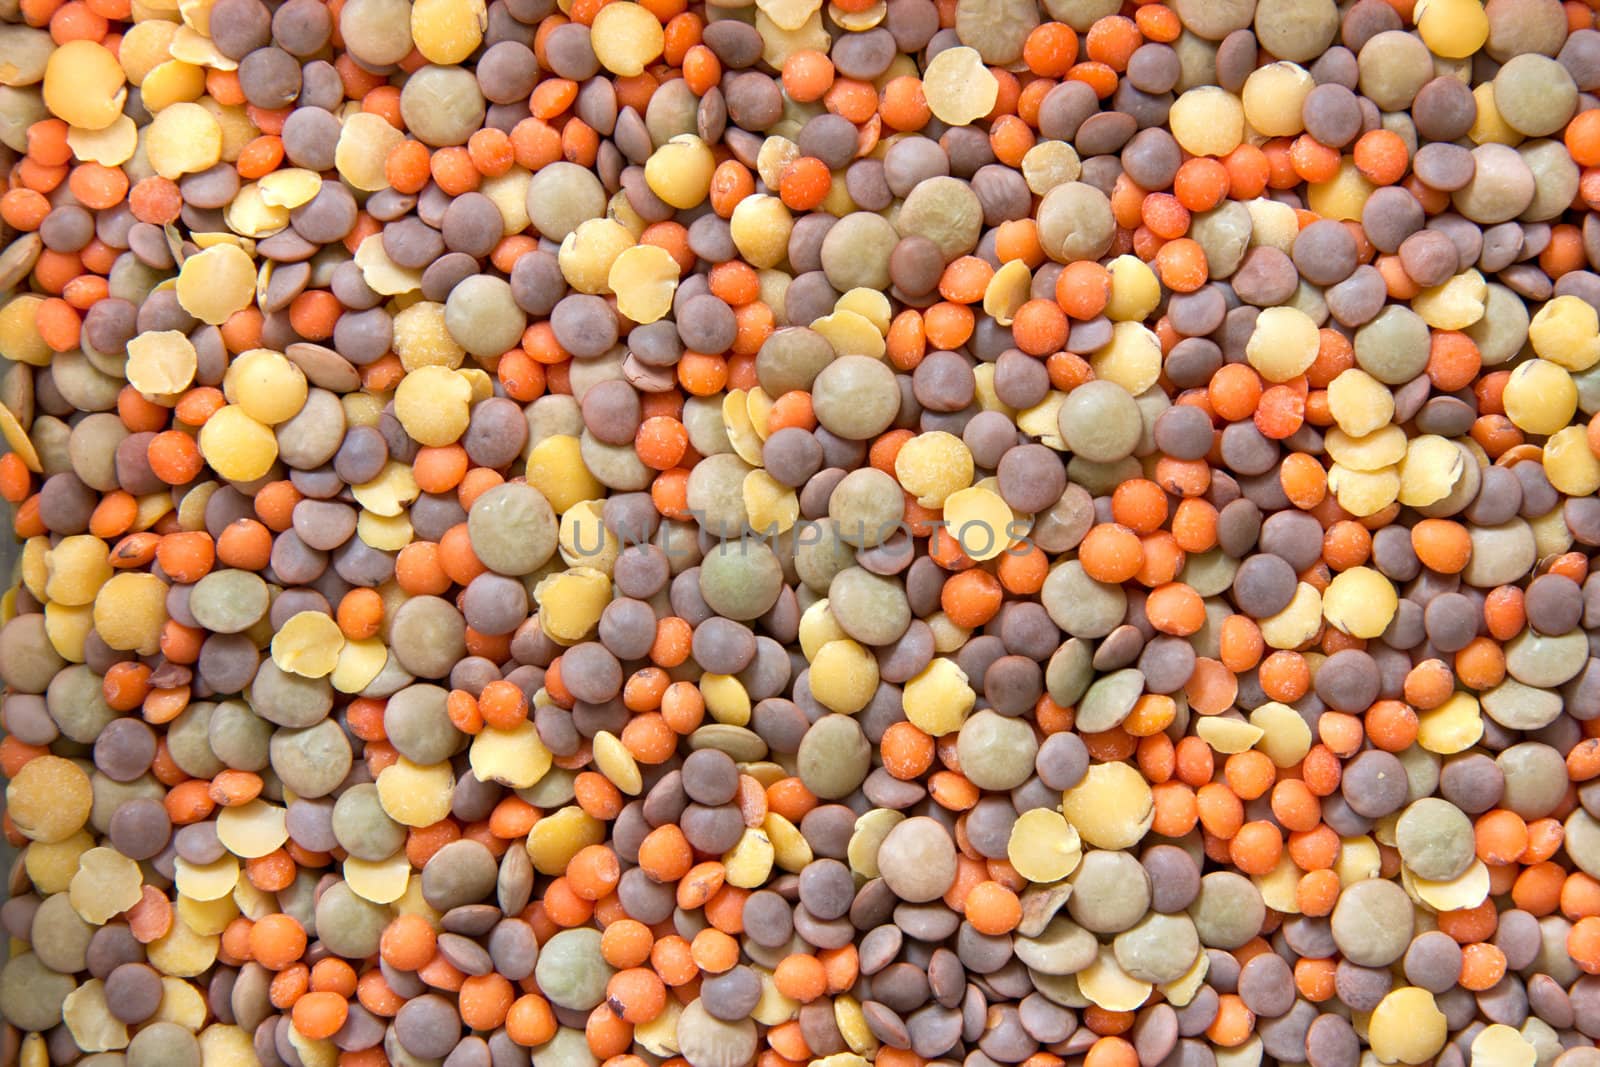 Lentils of the world  by raliand